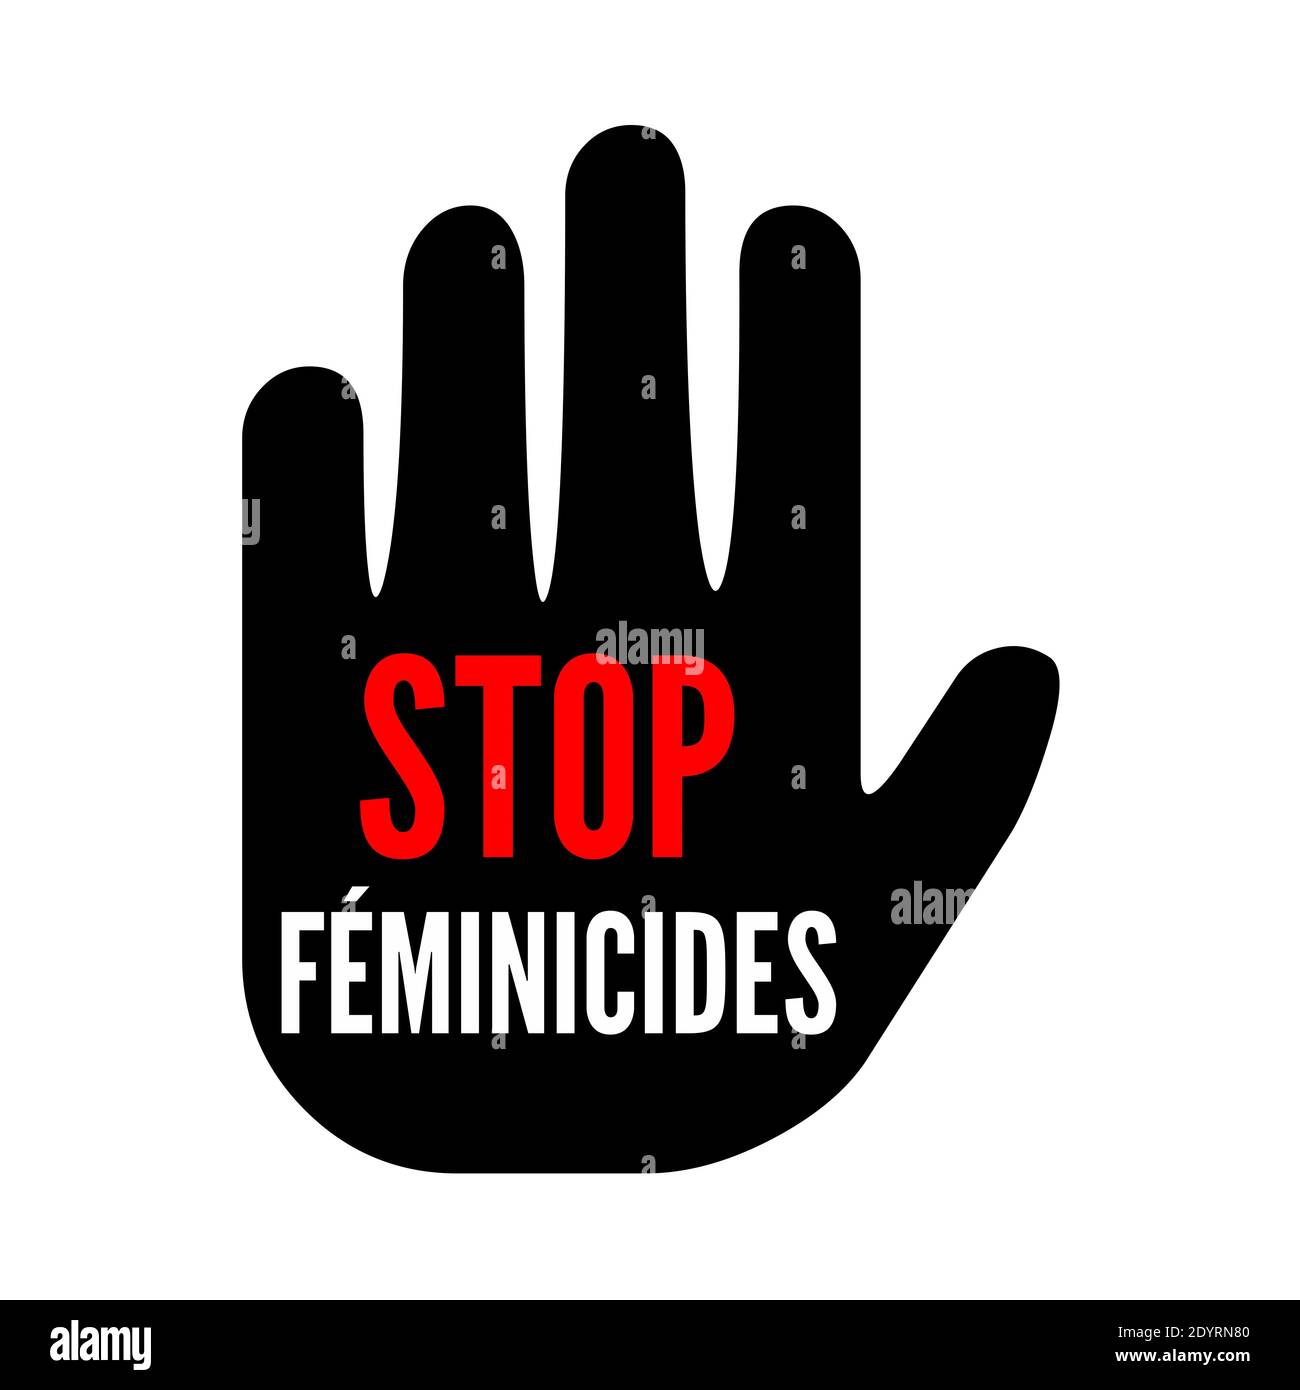 Stop femicide symbol concept illustration in french language Stock Photo